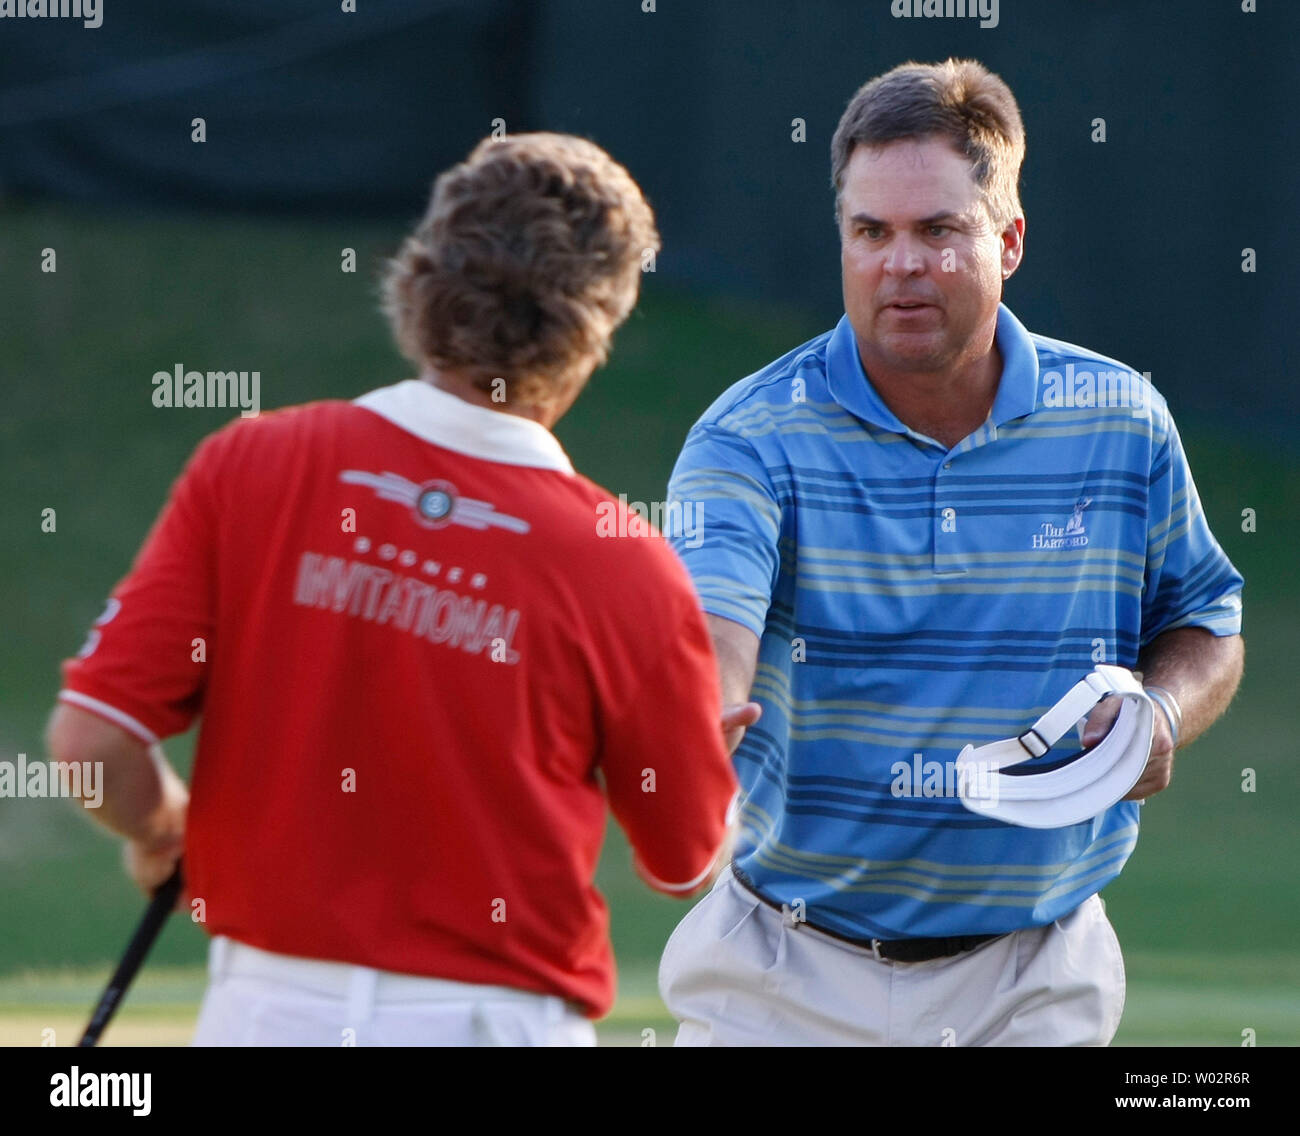 Kenny Perry (R), from Franklin, Kentucky, congratulates Bernhard Langer (L), from Munich, Germany, on green #18 after their third round of The Players Championship PGA golf tournament in Ponte Vedra Beach, Florida on May 10, 2008.   (UPI Photo/Mark Wallheiser) Stock Photo